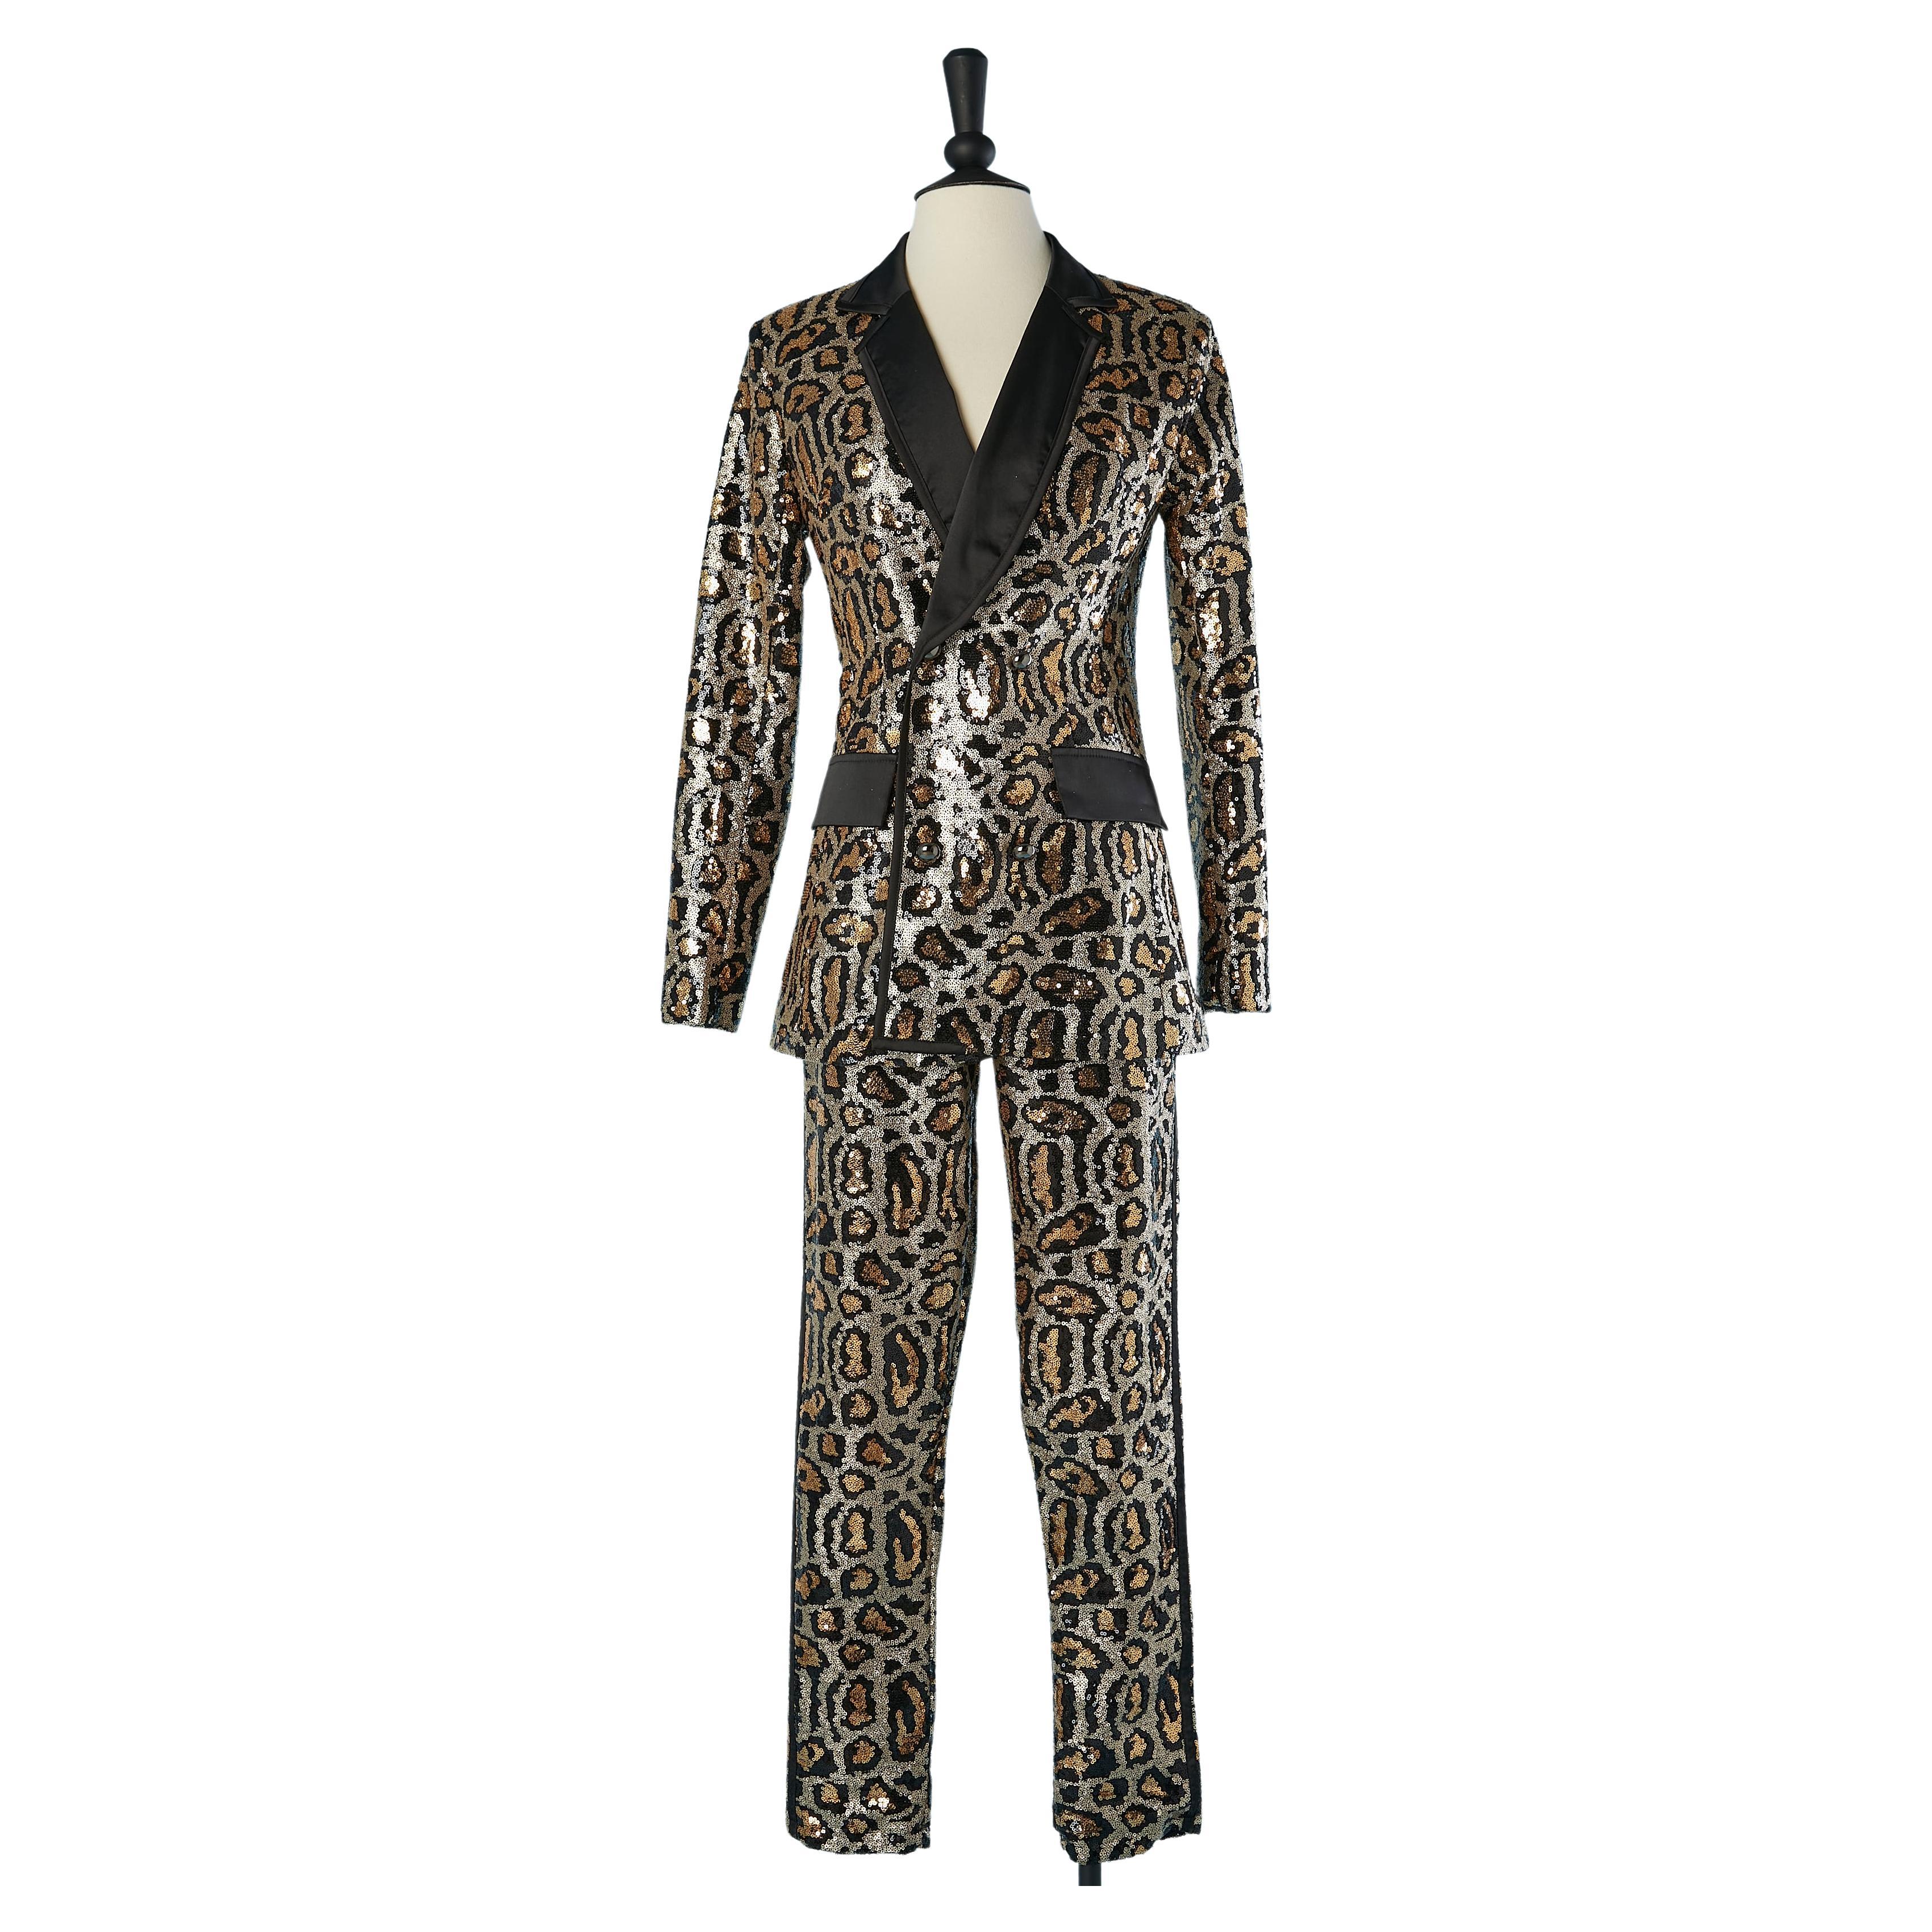 Evening double breasted trouser suit in sequin leopard pattern Circa 2000 For Sale